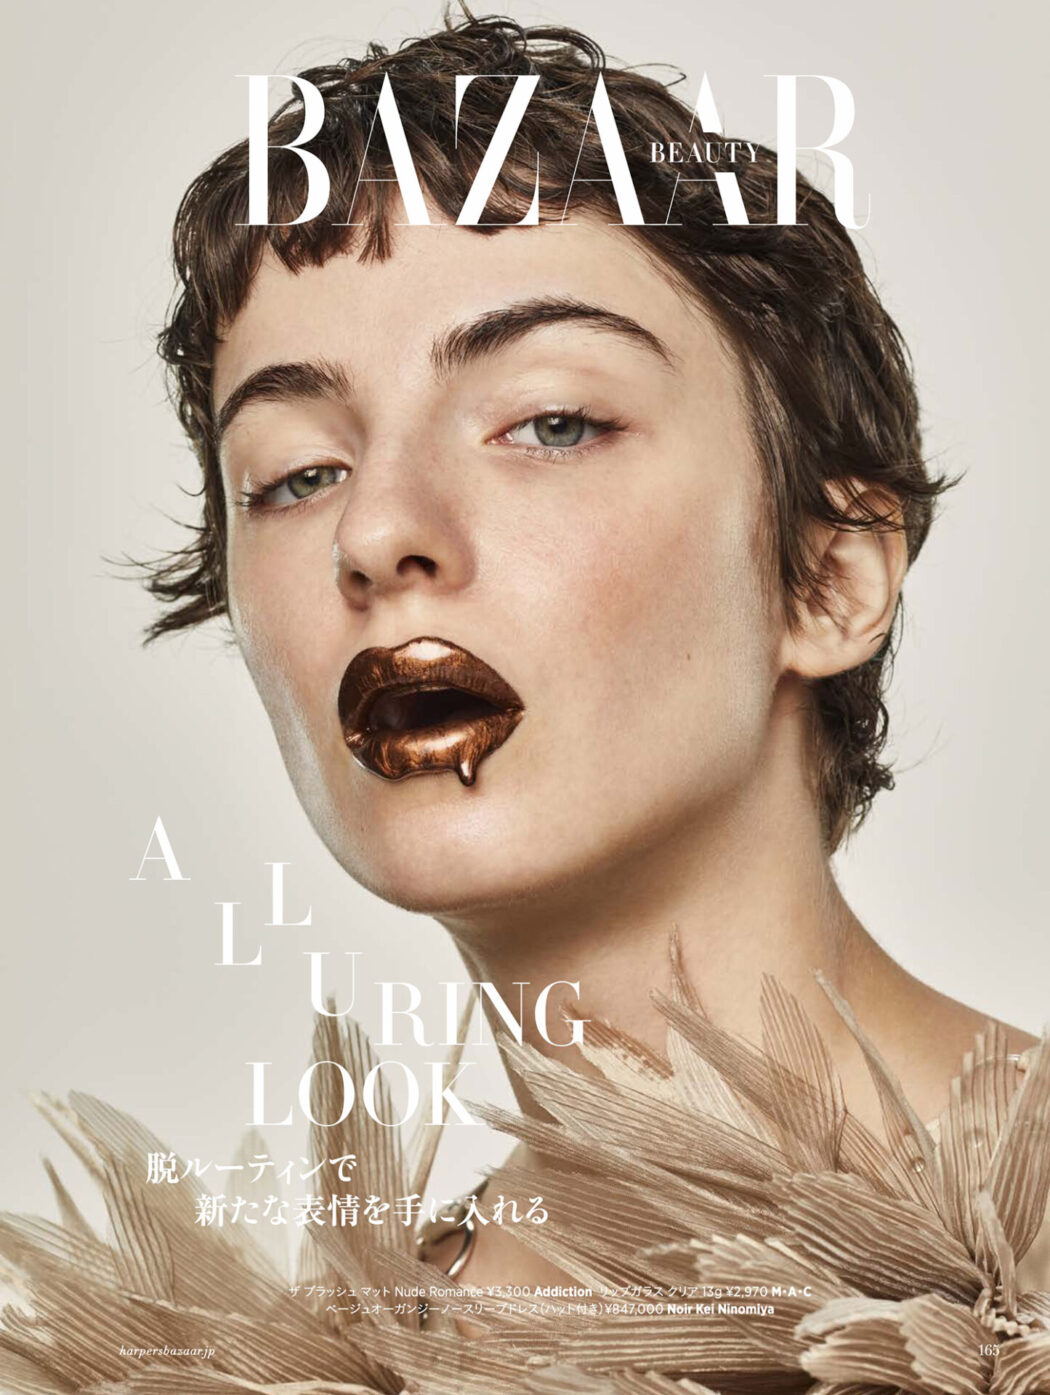 Make up by Yumi Endo
Harper's BAZAAR March issue 2022